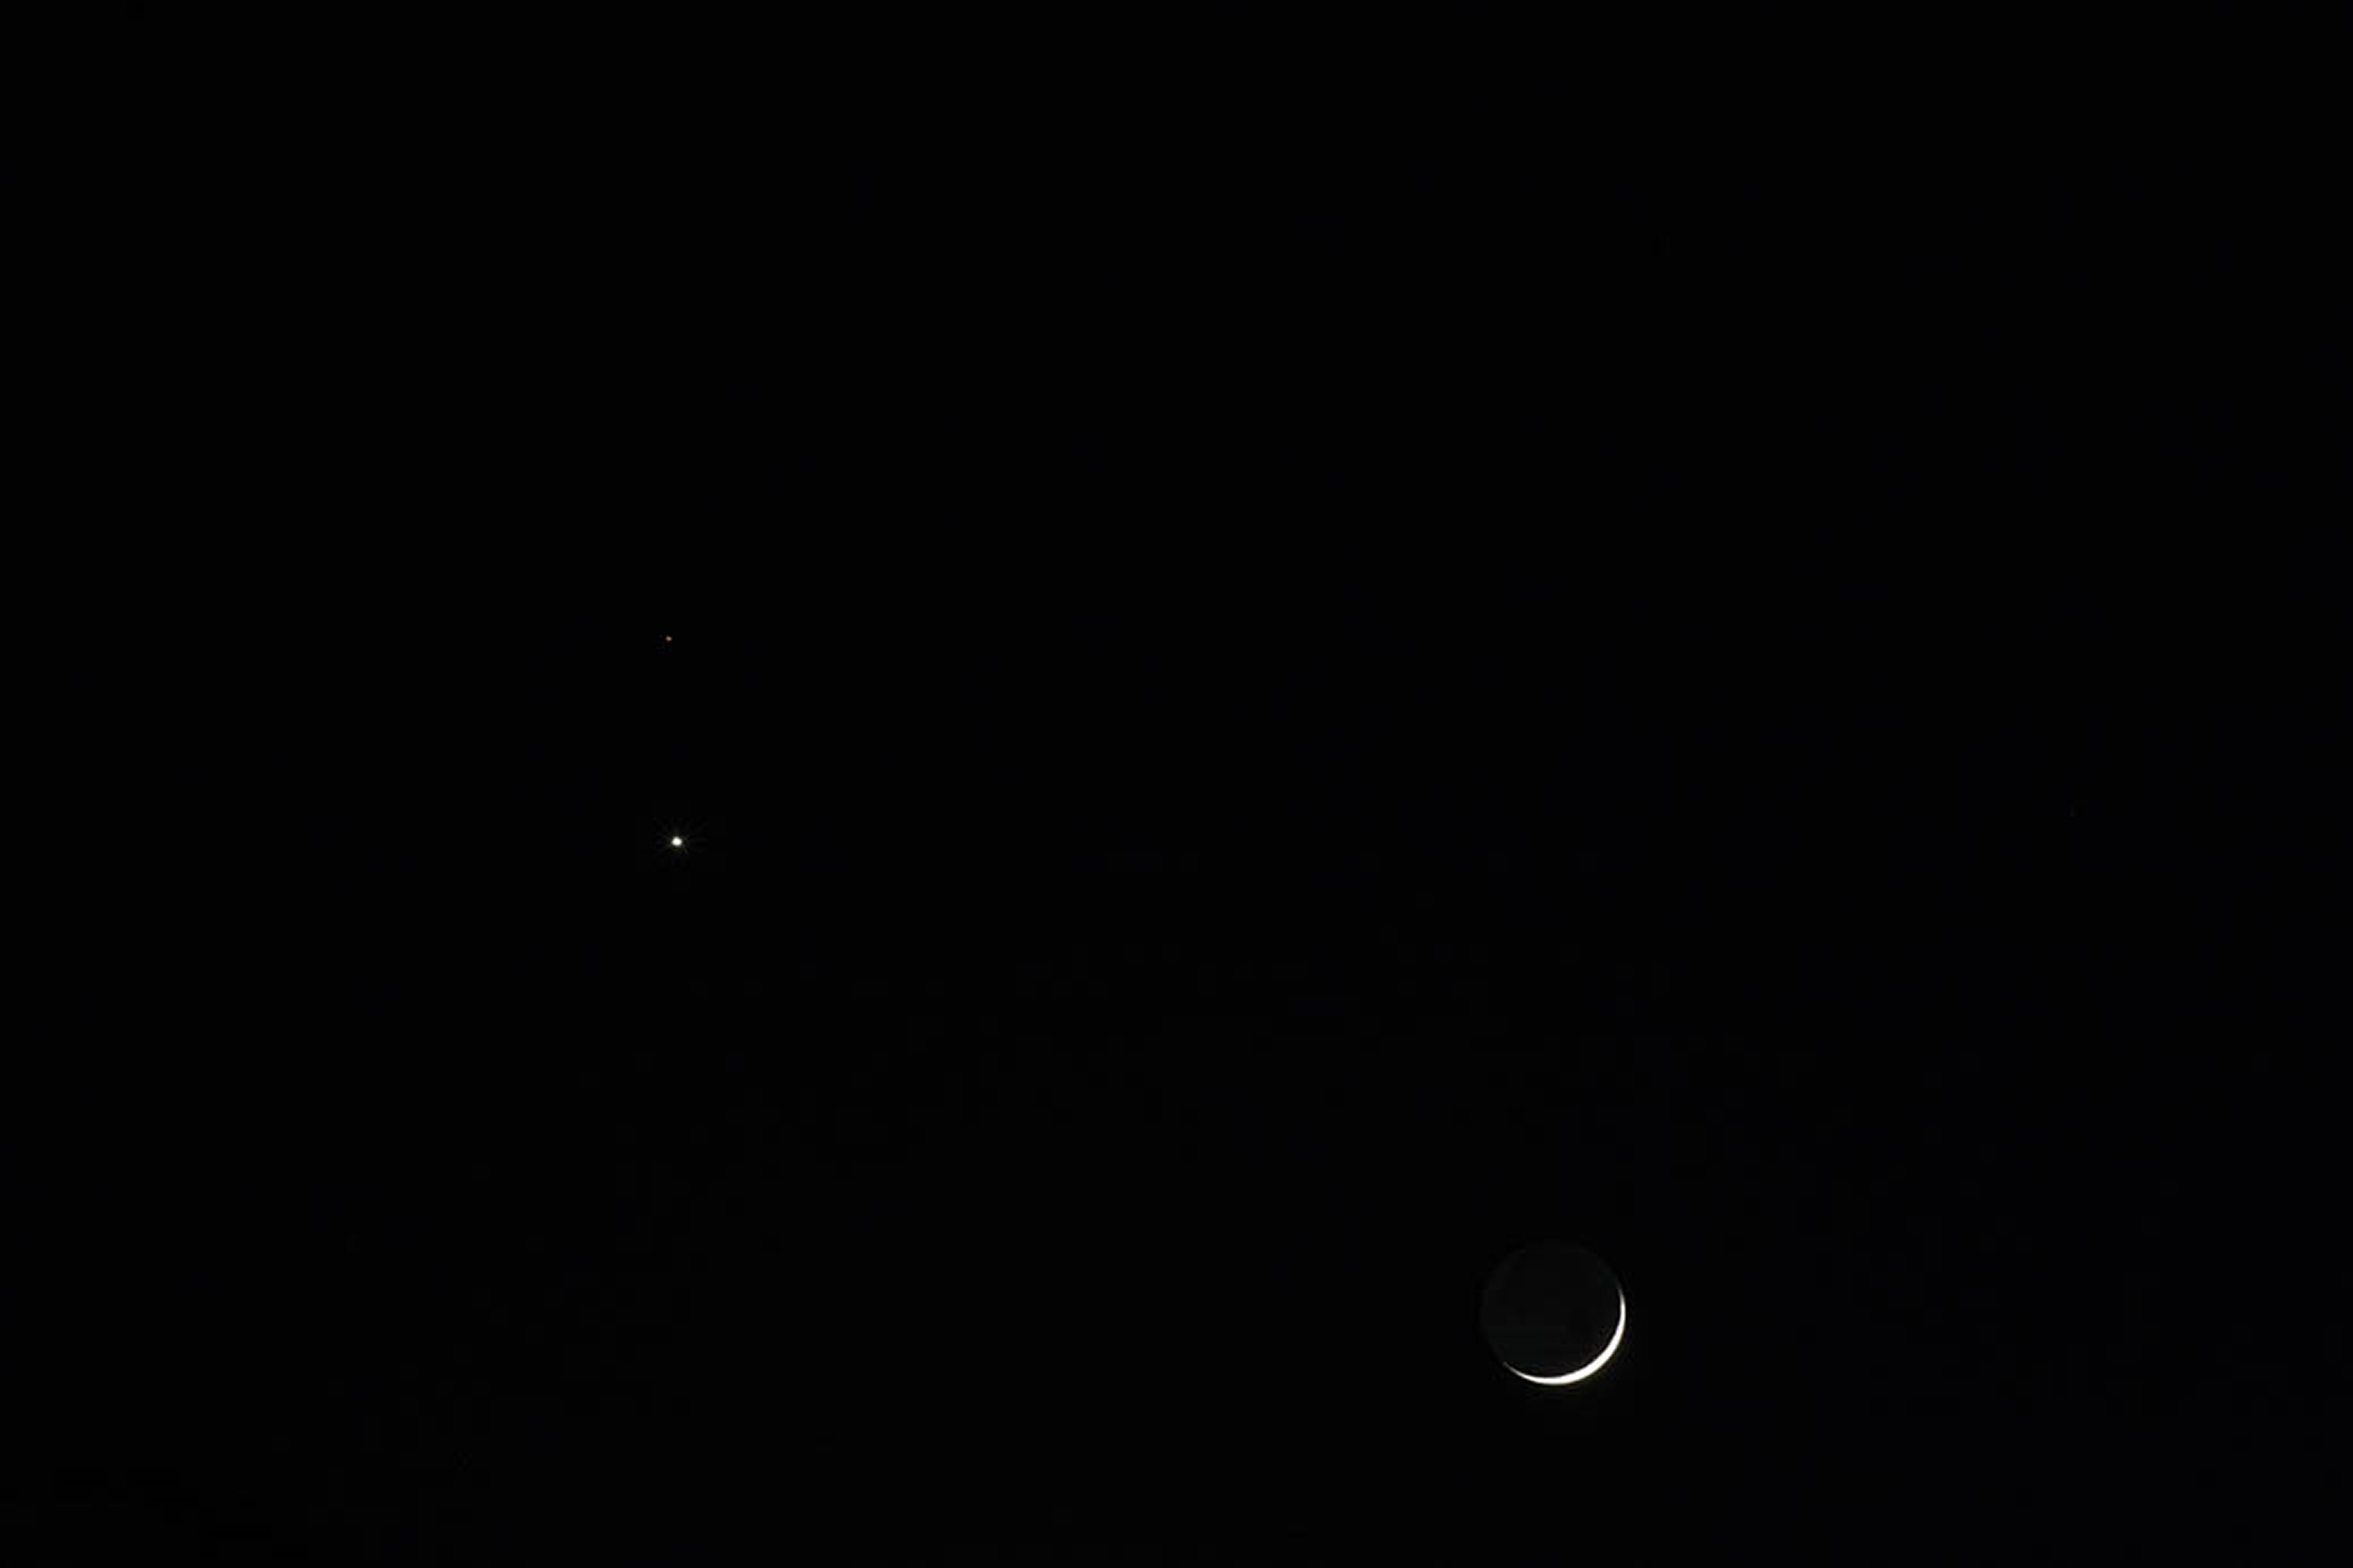 Mars, venus and the Moon By Tony Hayes.  20th February 18.49 UT Year unknown, Canon EOS 1200D. f/22 ISO-6400 1.6 second exposure time. Brightness & contrast adjusted in Photoshop